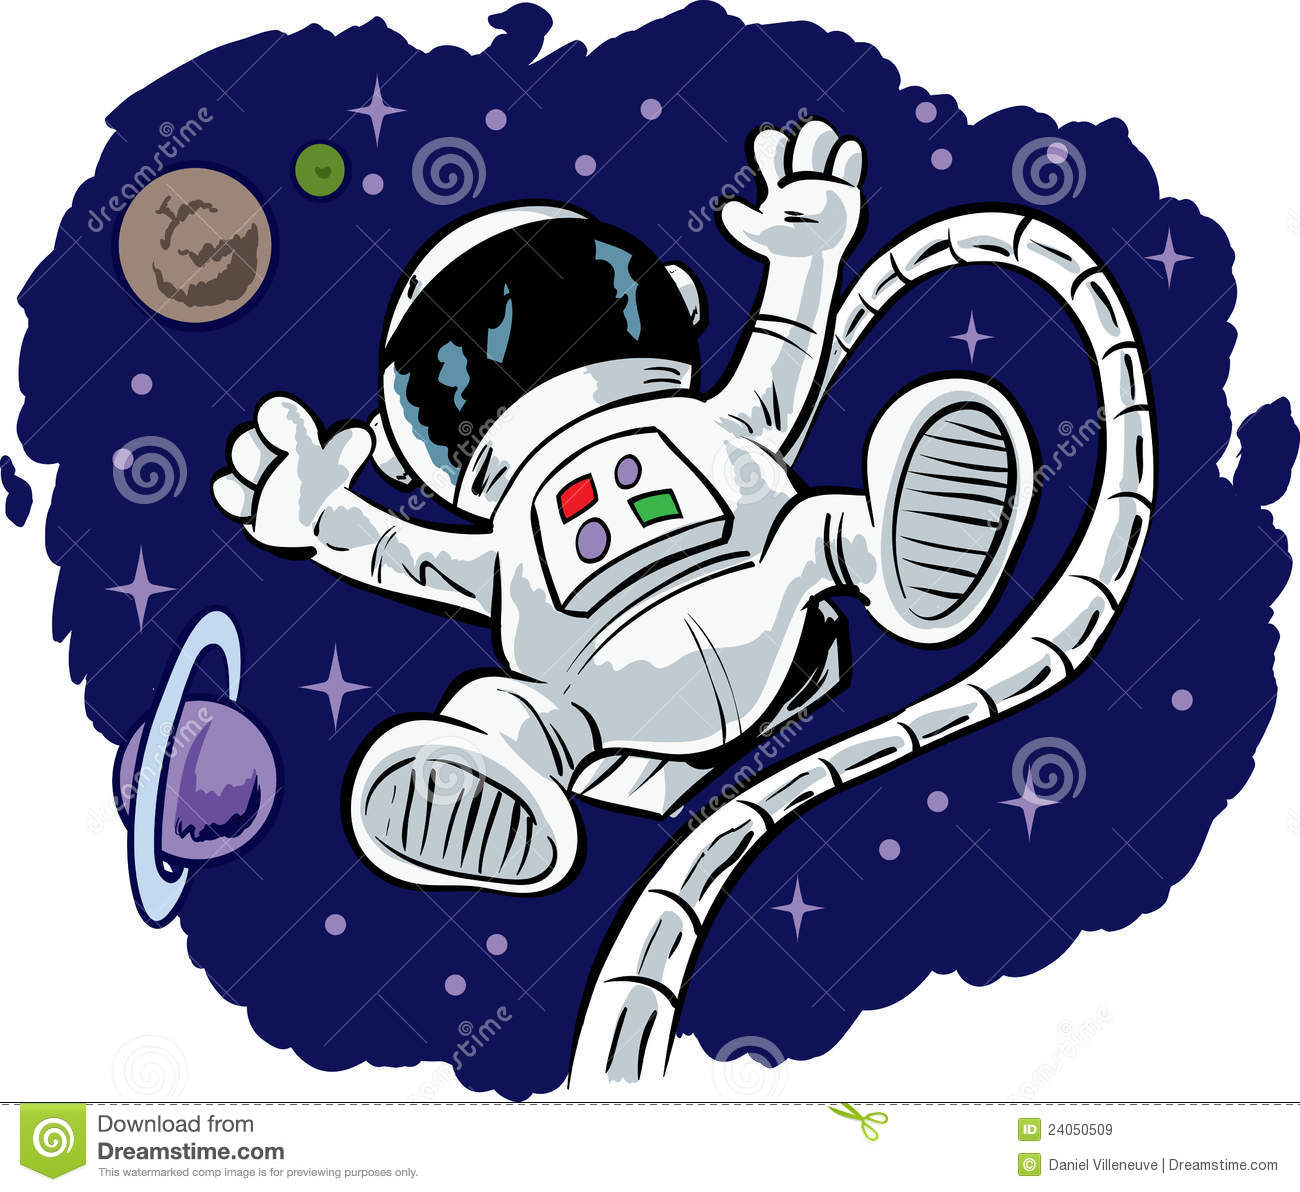 Cute Floating Astronaut Royalty Free Stock Images   Image  24050509